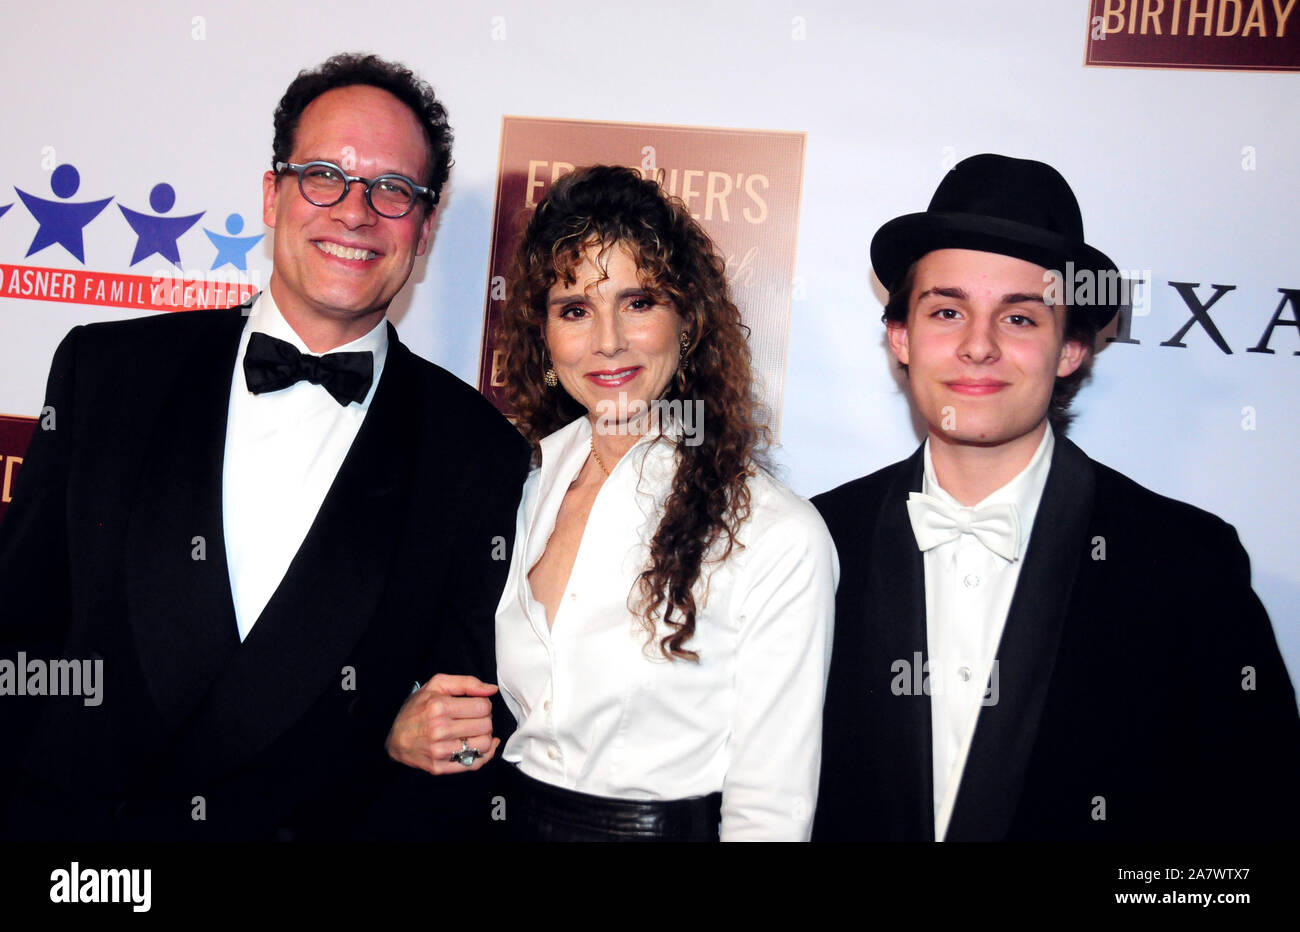 Hollywood, California, USA 3rd November 2019 Actor Diedrich Bader, wife Dulcy Rogers and son Sebastian Bader attend Ed Asner's 90th Birthday Party and Roast on November 3, 2019 at Hollywood Roosevelt Hotel in Hollywood, California, USA. Photo by Barry King/Alamy Stock Photo Stock Photo